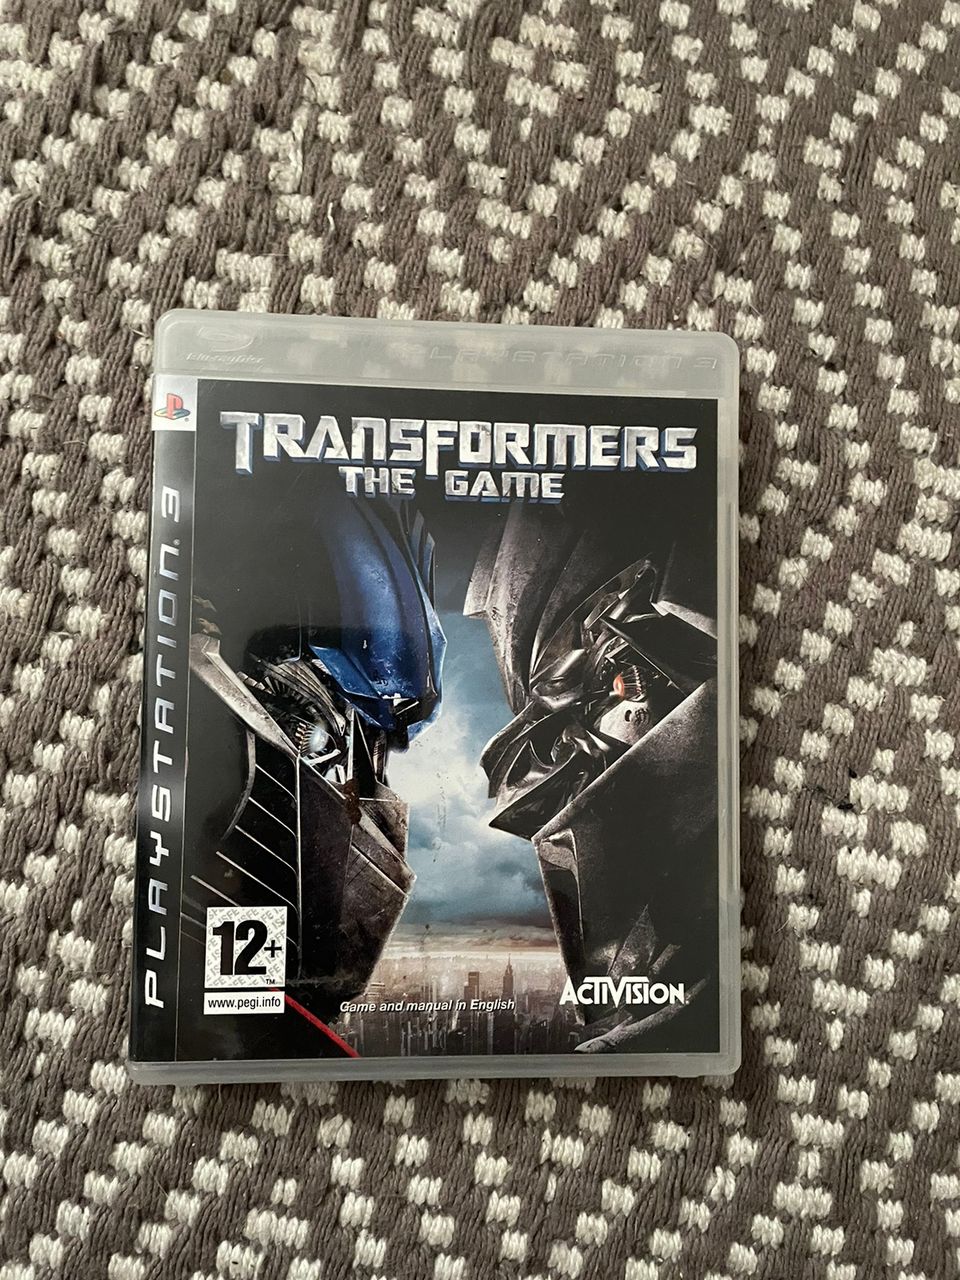 Ps3 Transformers The Game